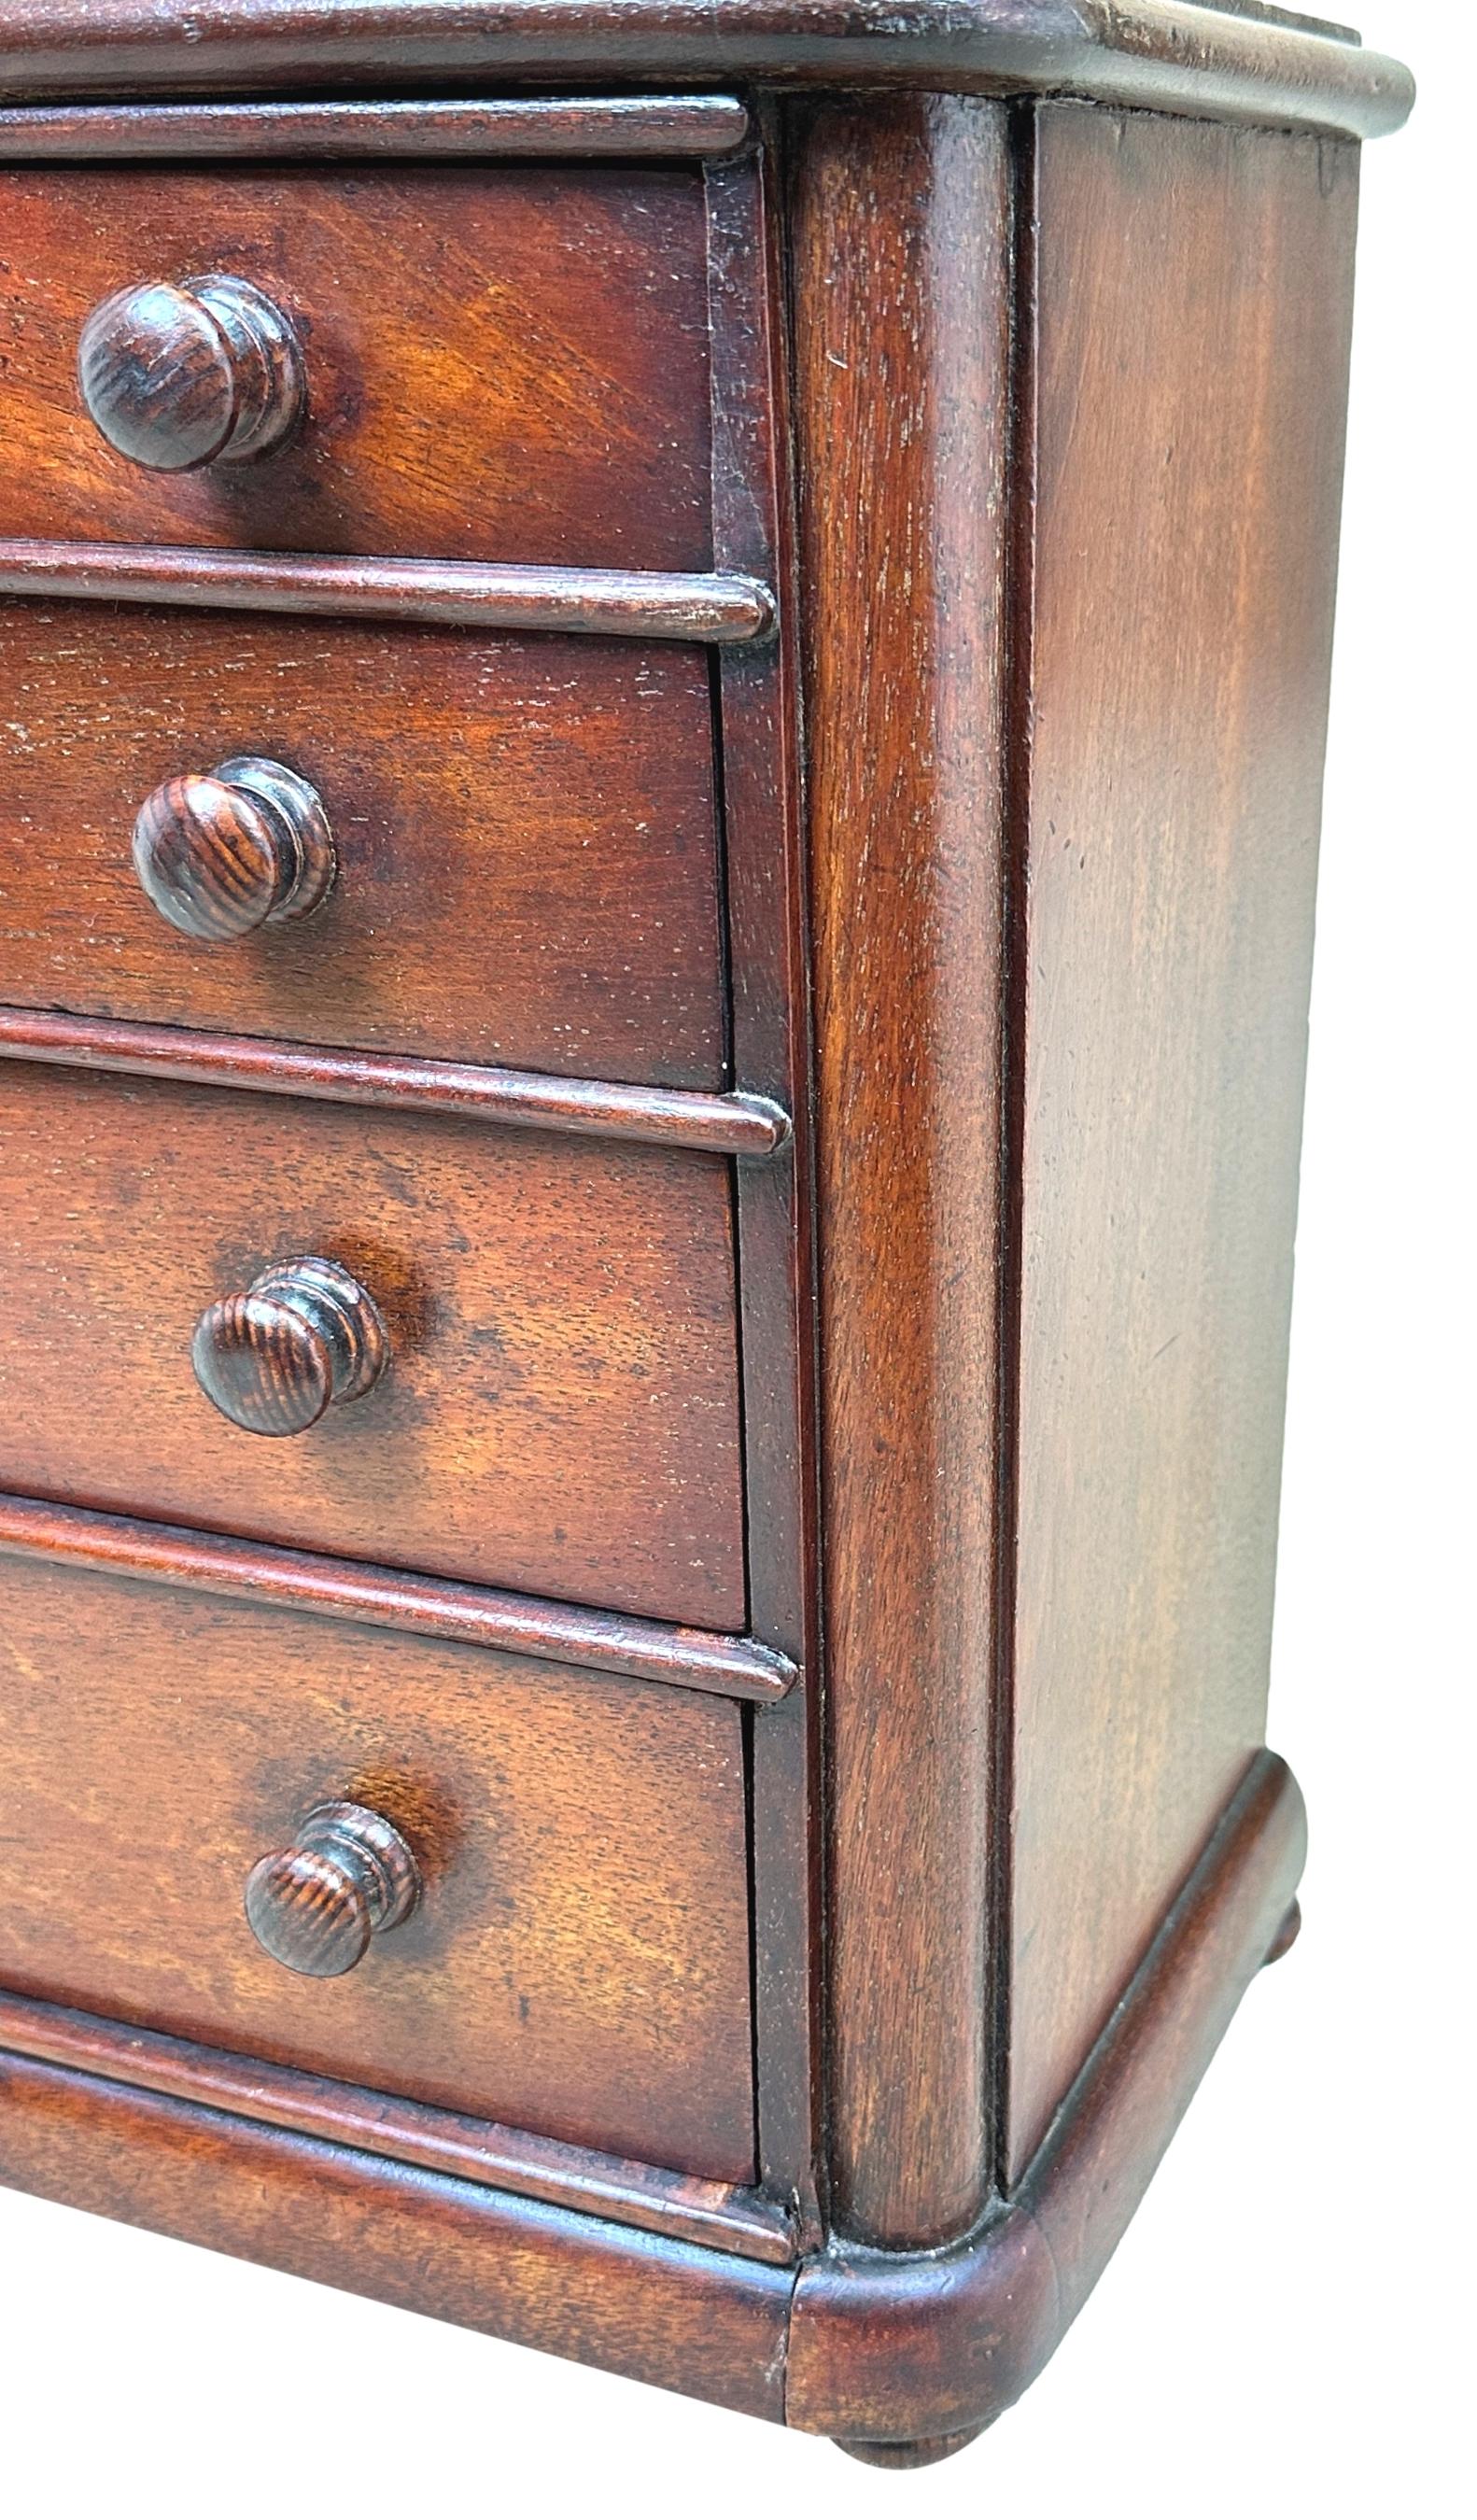 A charming late 19th century mahogany minaiture chest, having rectangular top over two short and three long drawers, retaining original turned wooden knobs, flanked by rounded corners, raised on original turned wooden feet.

Much discussion is had